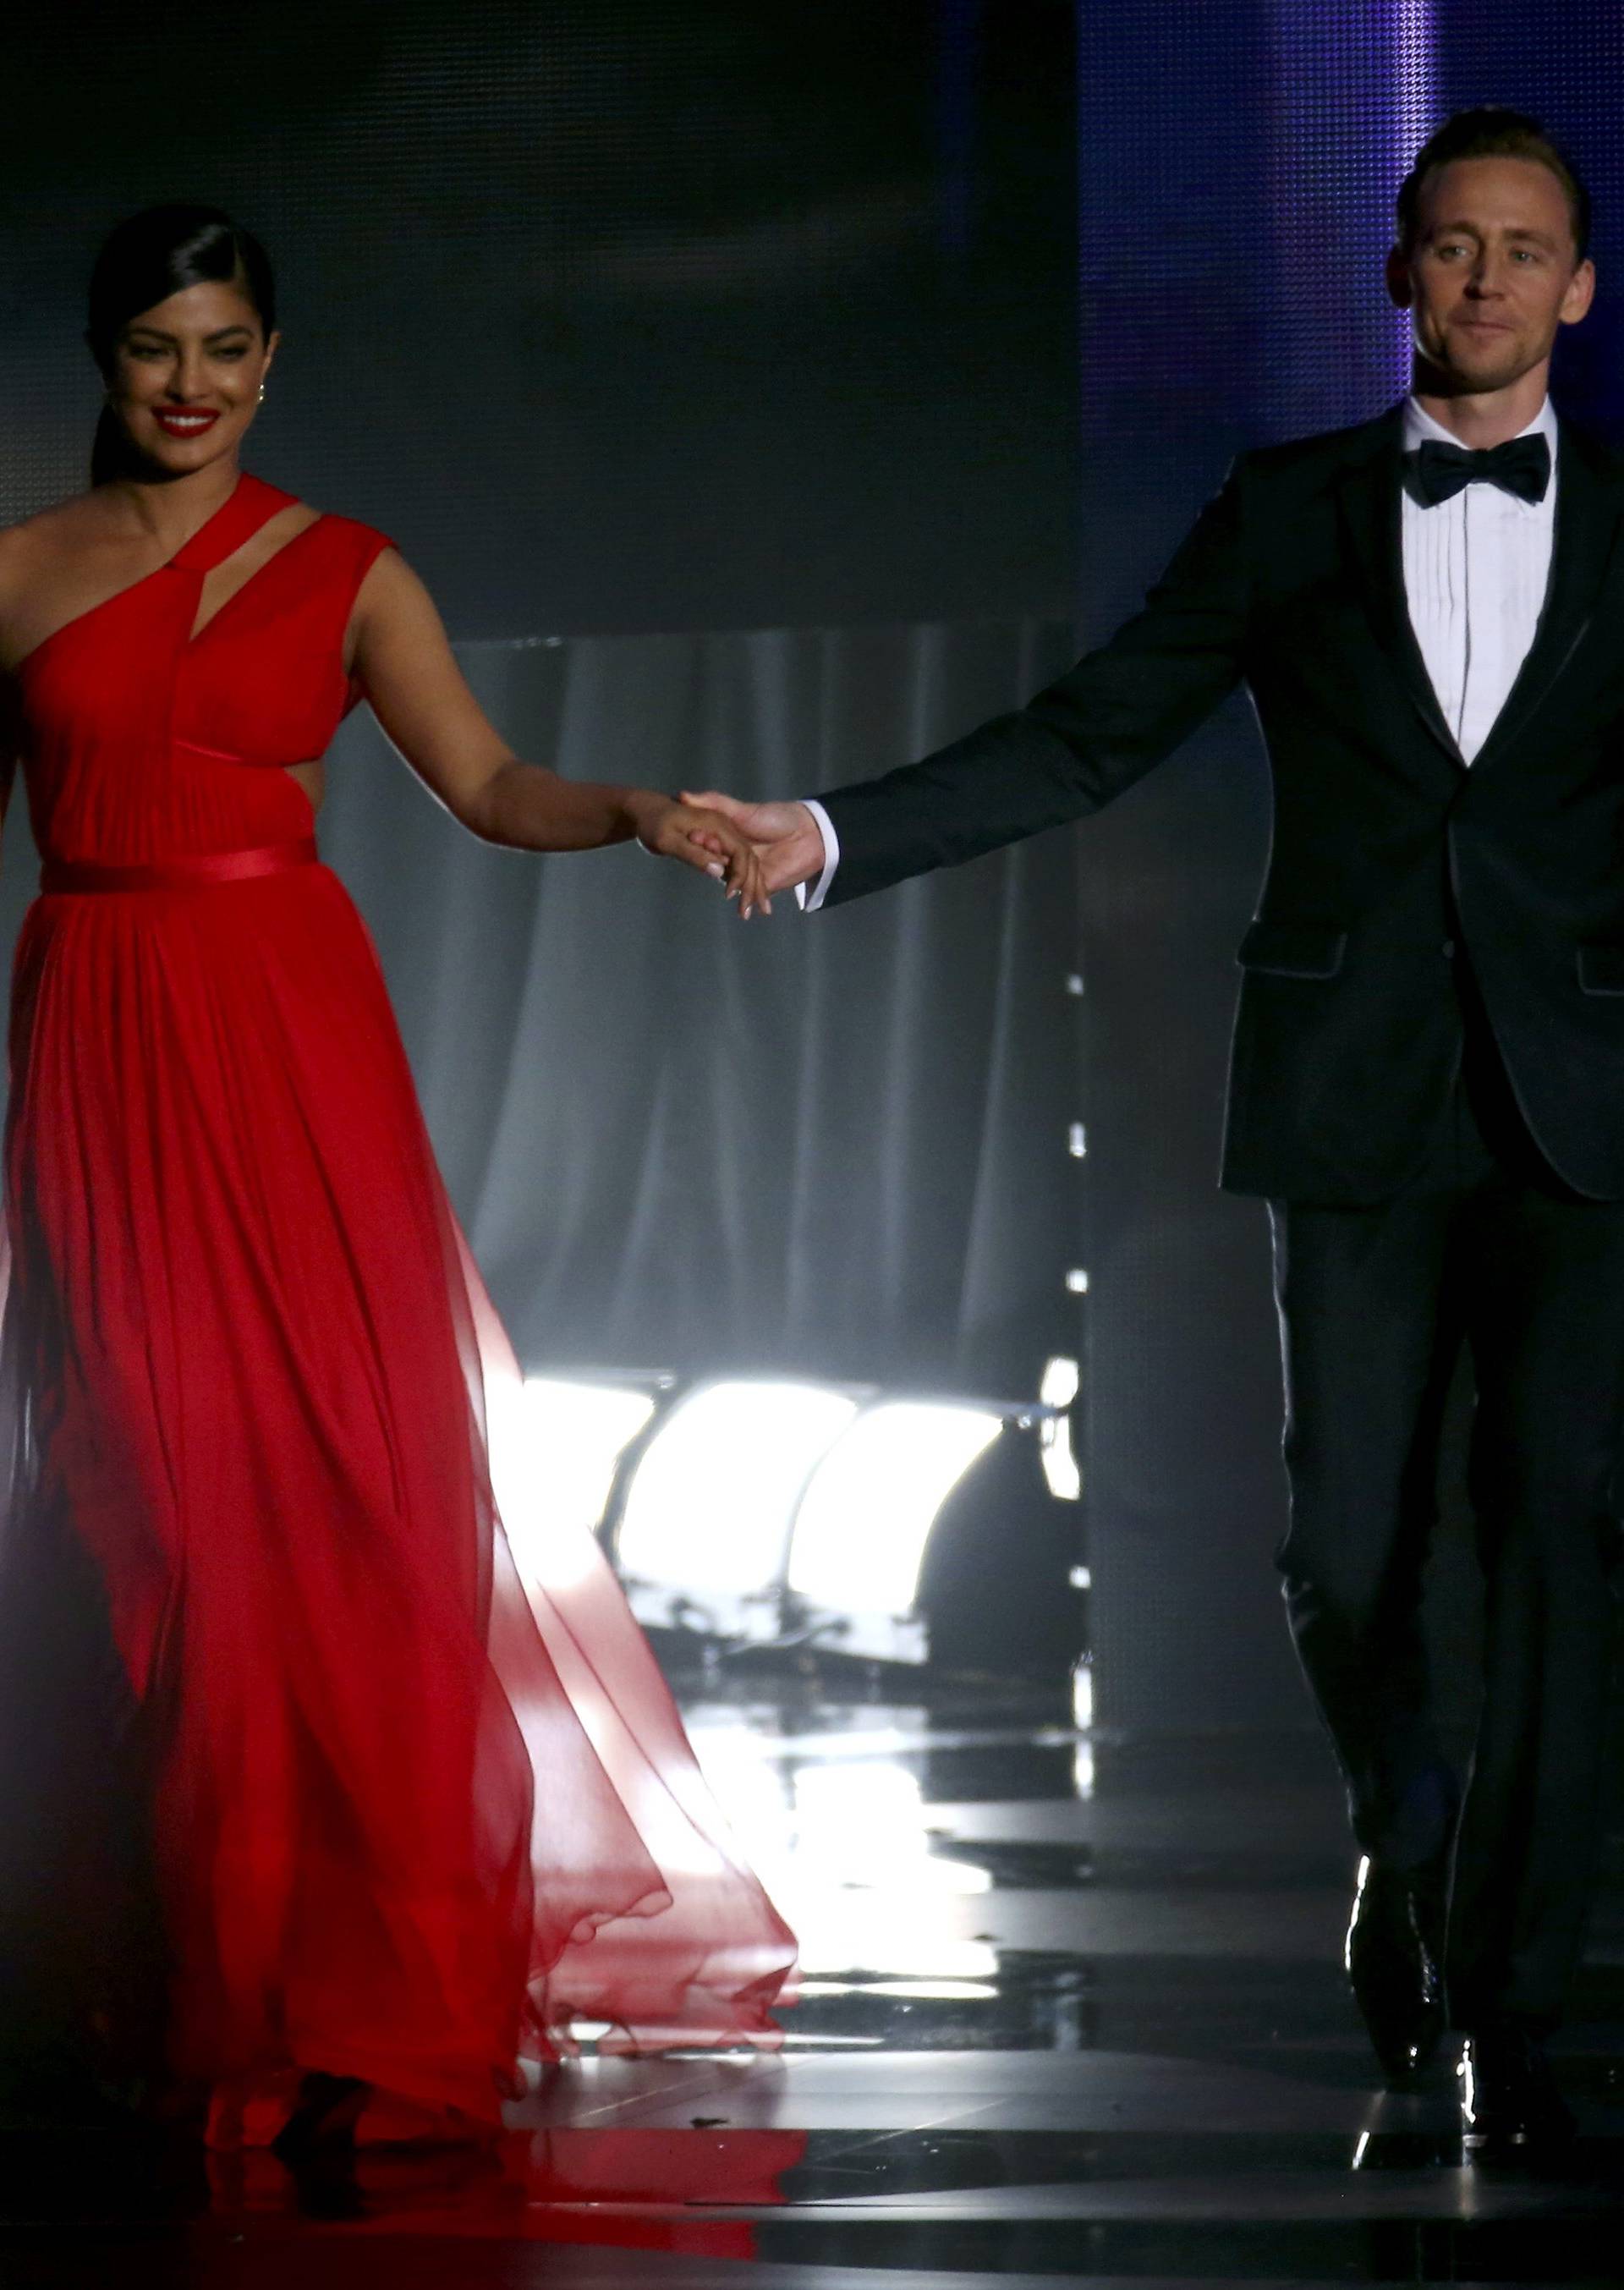 Actors Chopra and Hiddleston walk onstage to present an award at the 68th Primetime Emmy Awards in Los Angeles